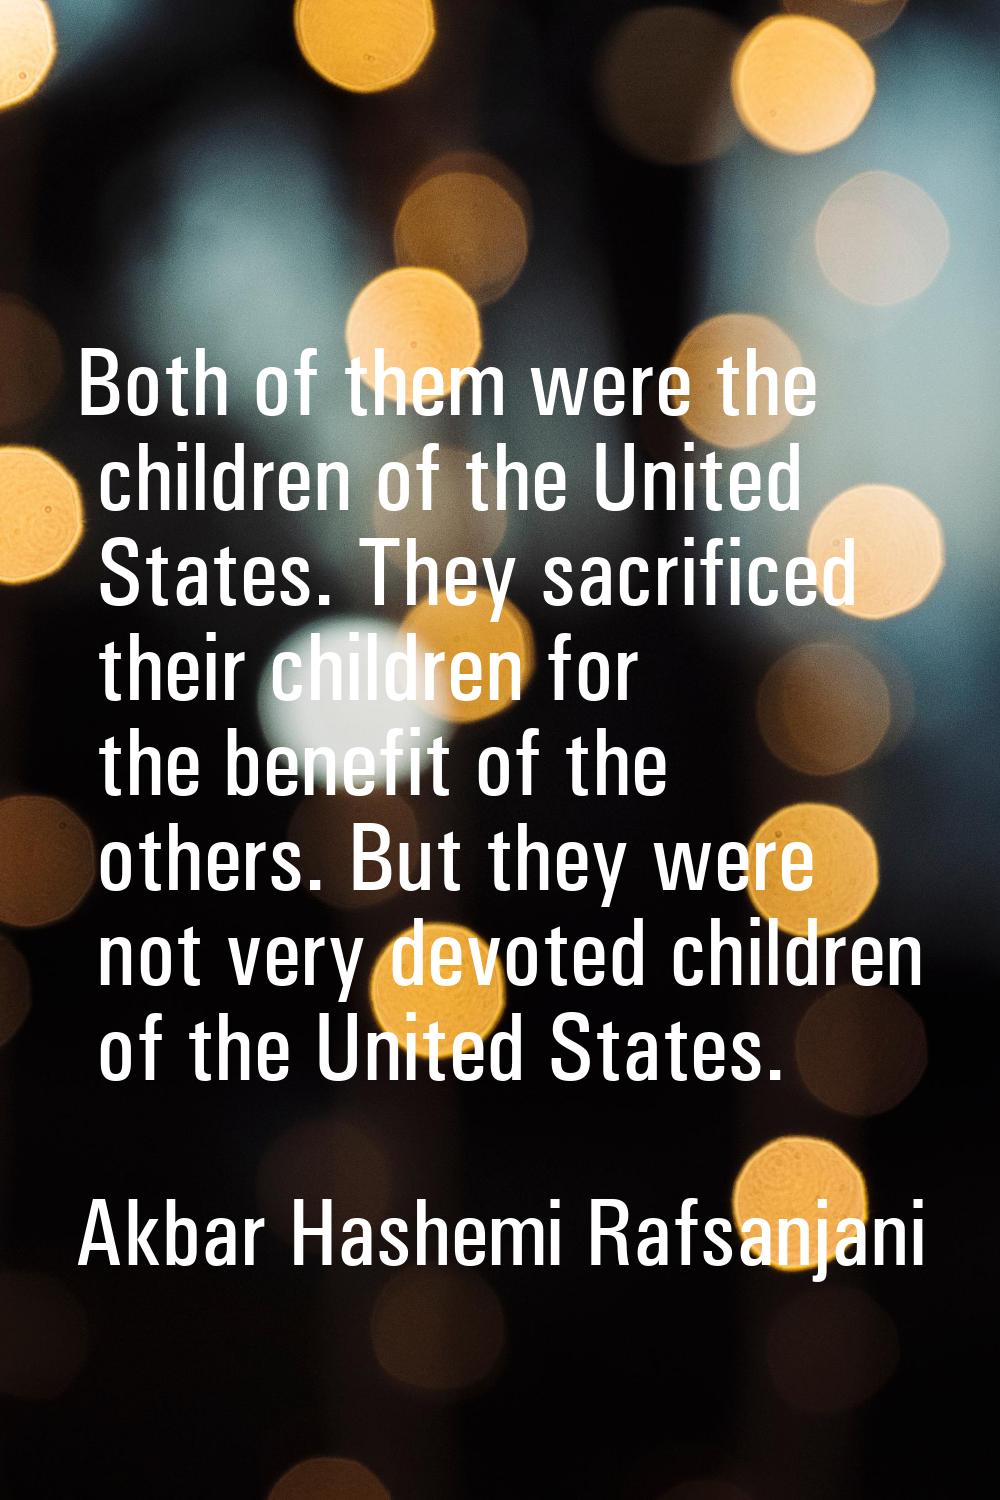 Both of them were the children of the United States. They sacrificed their children for the benefit